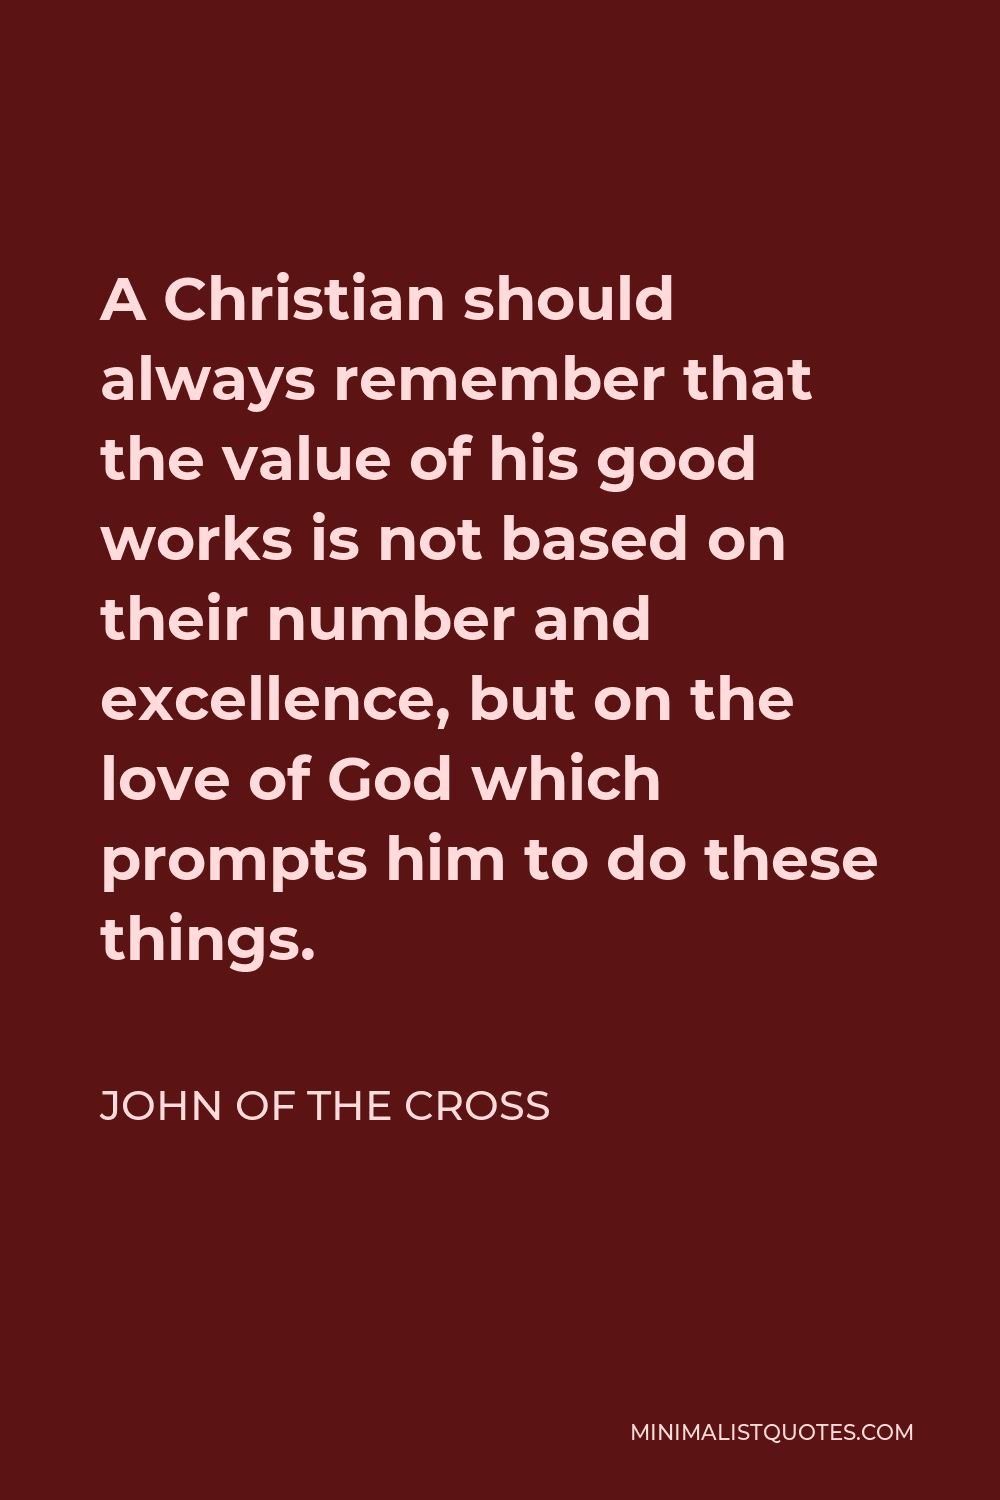 John of the Cross Quote - A Christian should always remember that the value of his good works is not based on their number and excellence, but on the love of God which prompts him to do these things.